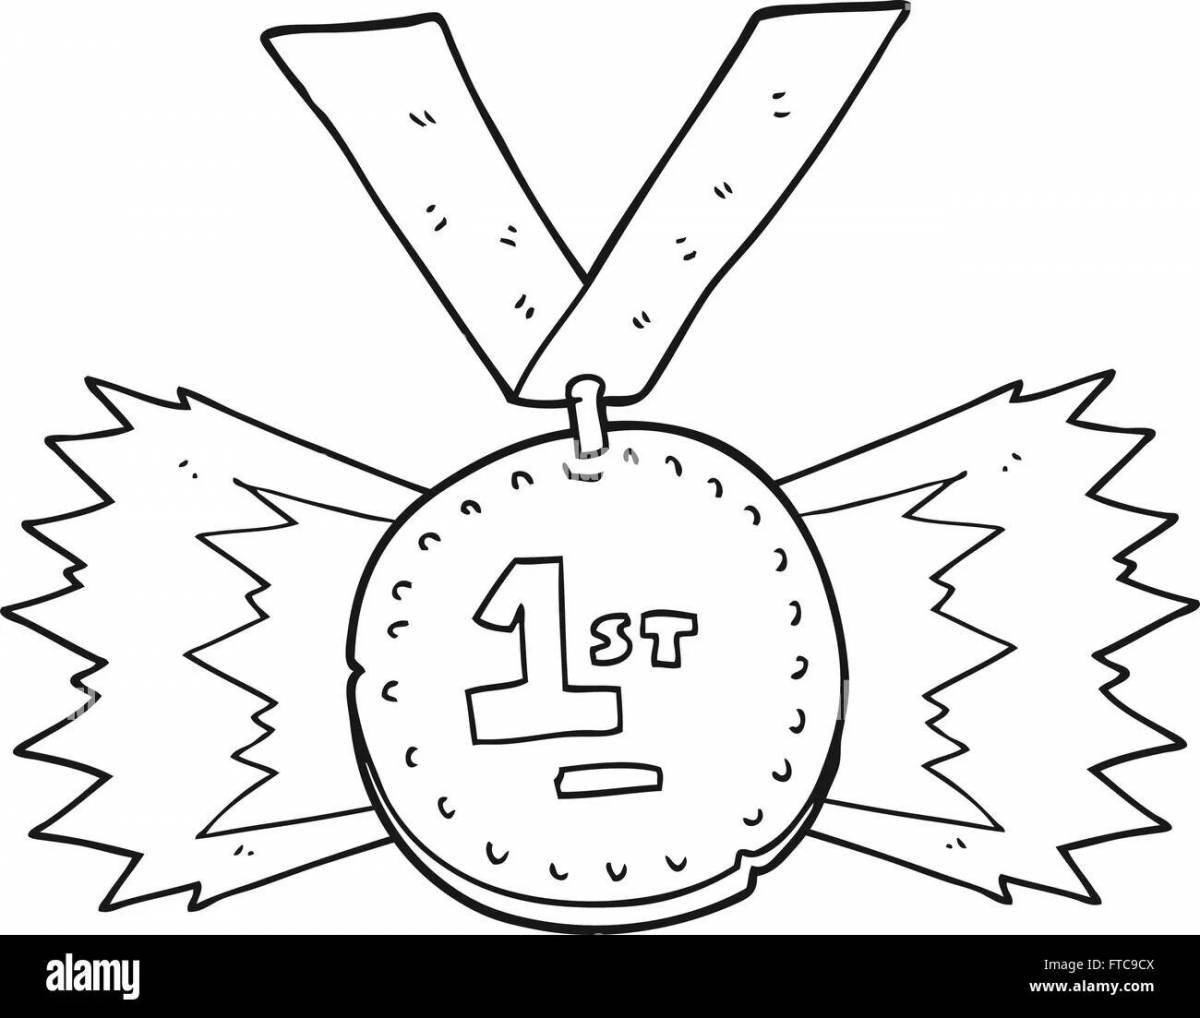 Colorfully detailed 1st place medal coloring page